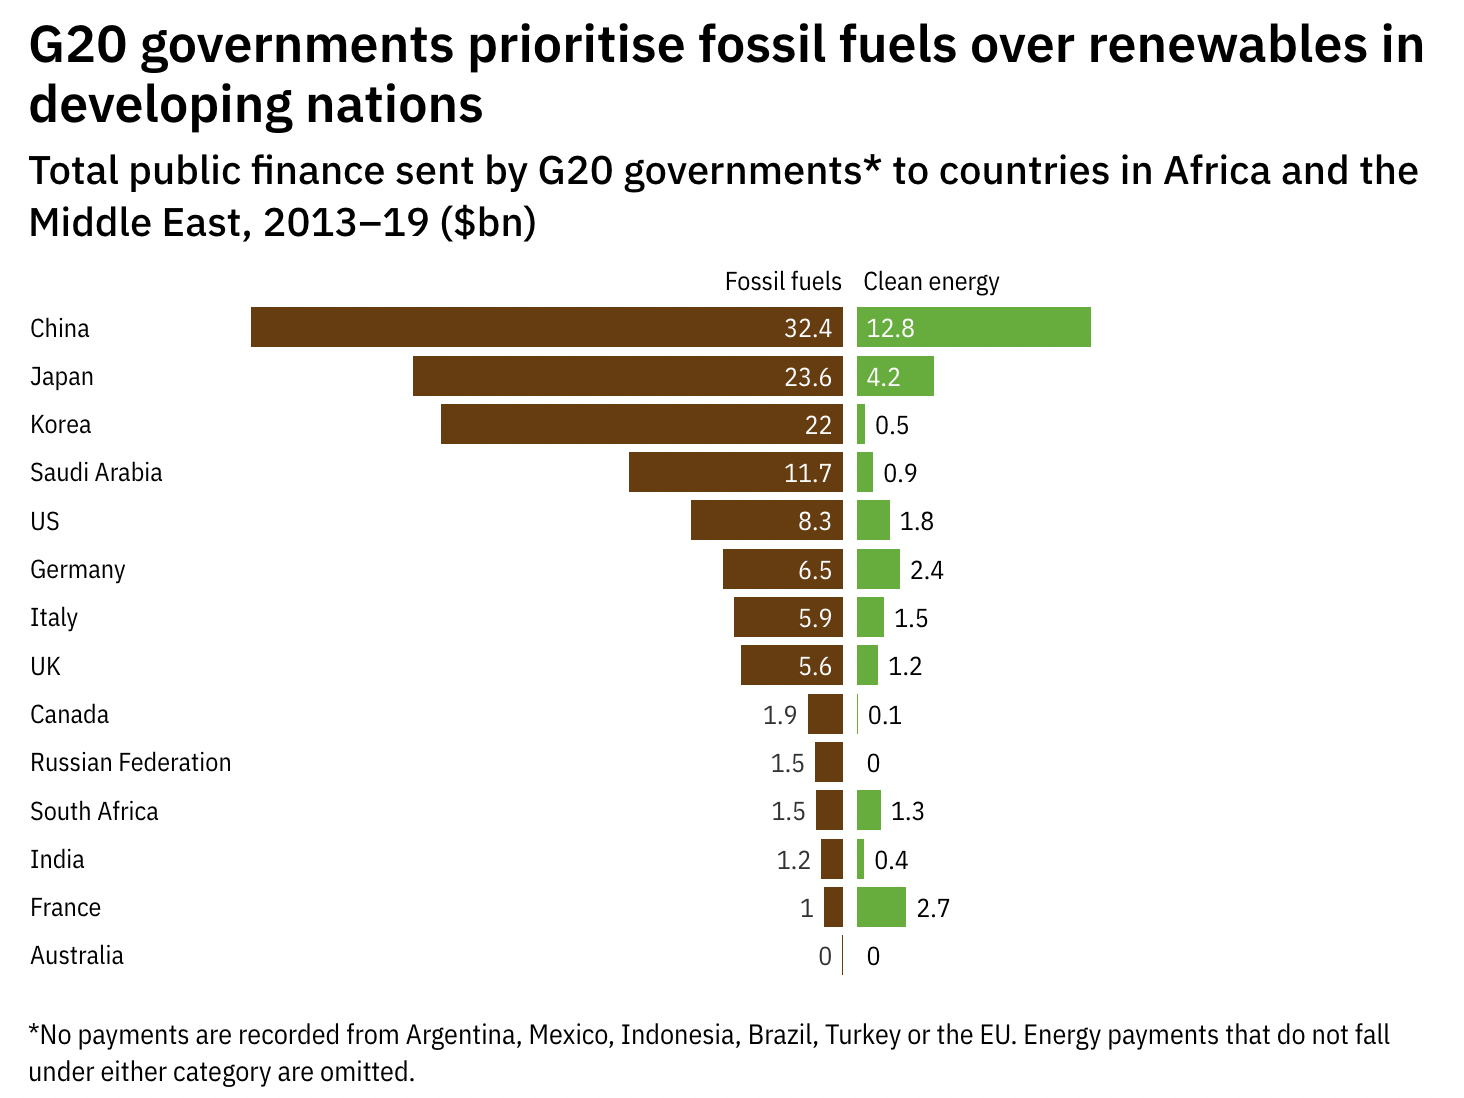 G20 funding in fossil fuels and renewal energy